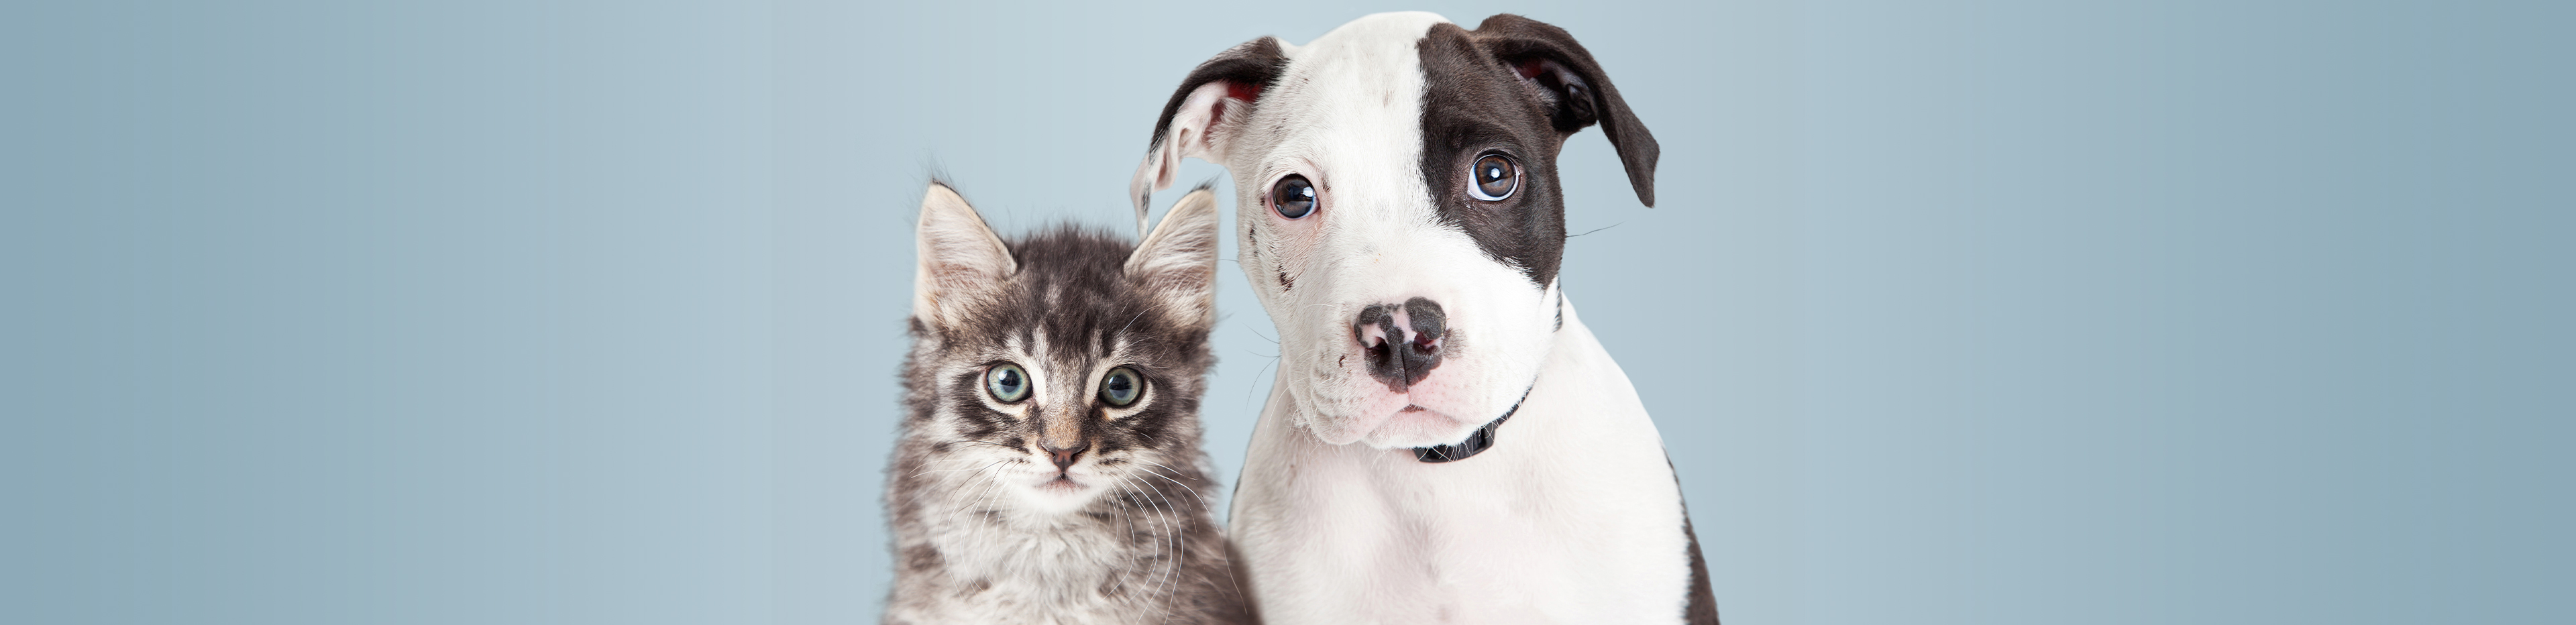 rspca pet insurance why you should get your cat and dog covered